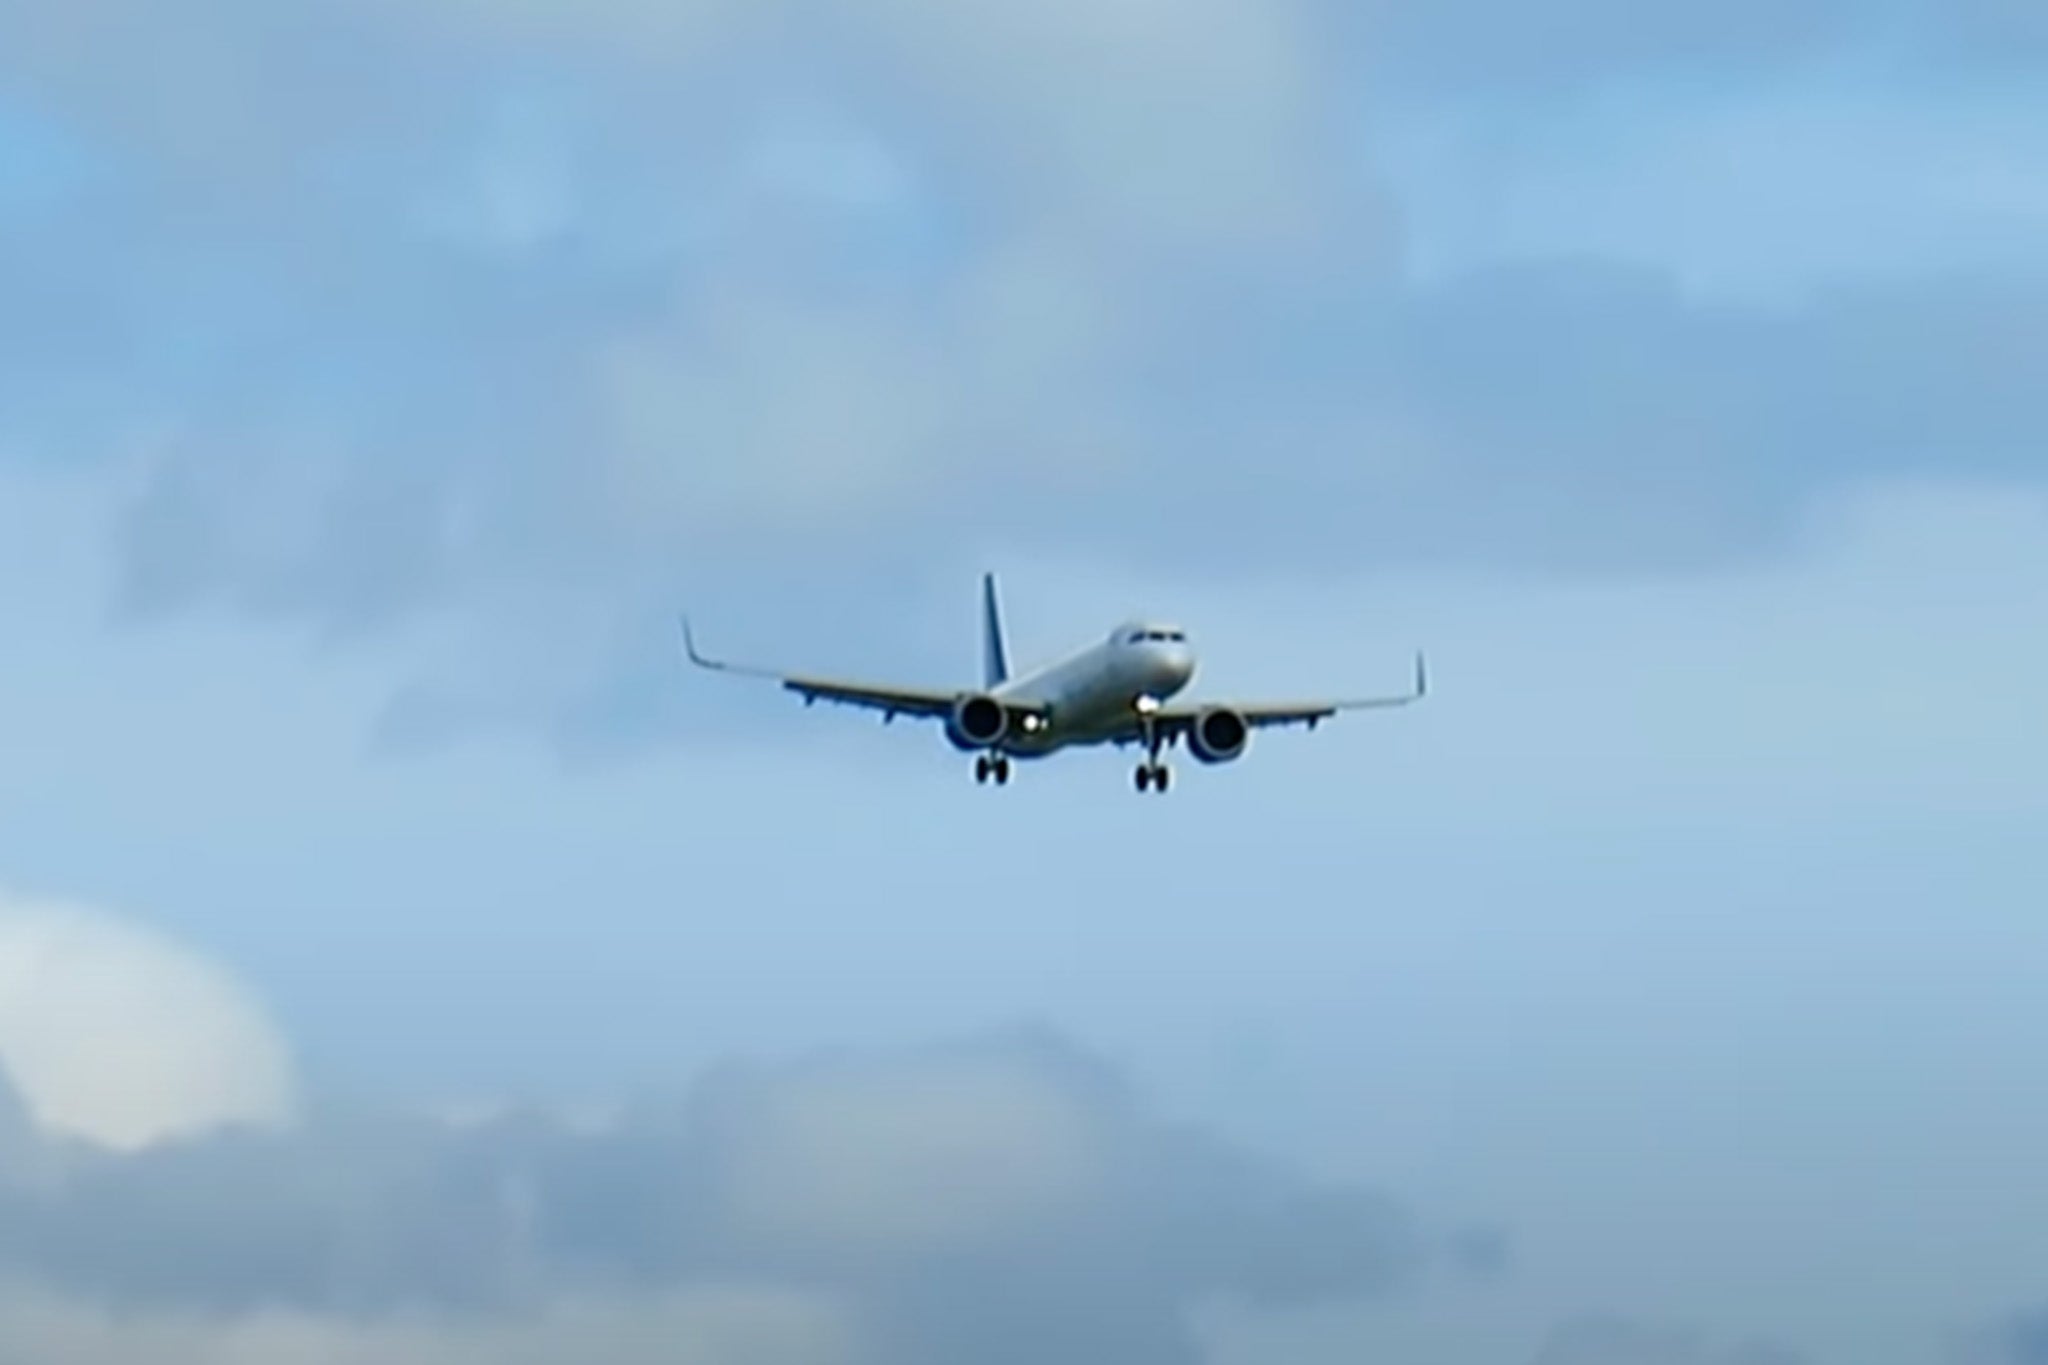 The footage shows several flights aborting landings